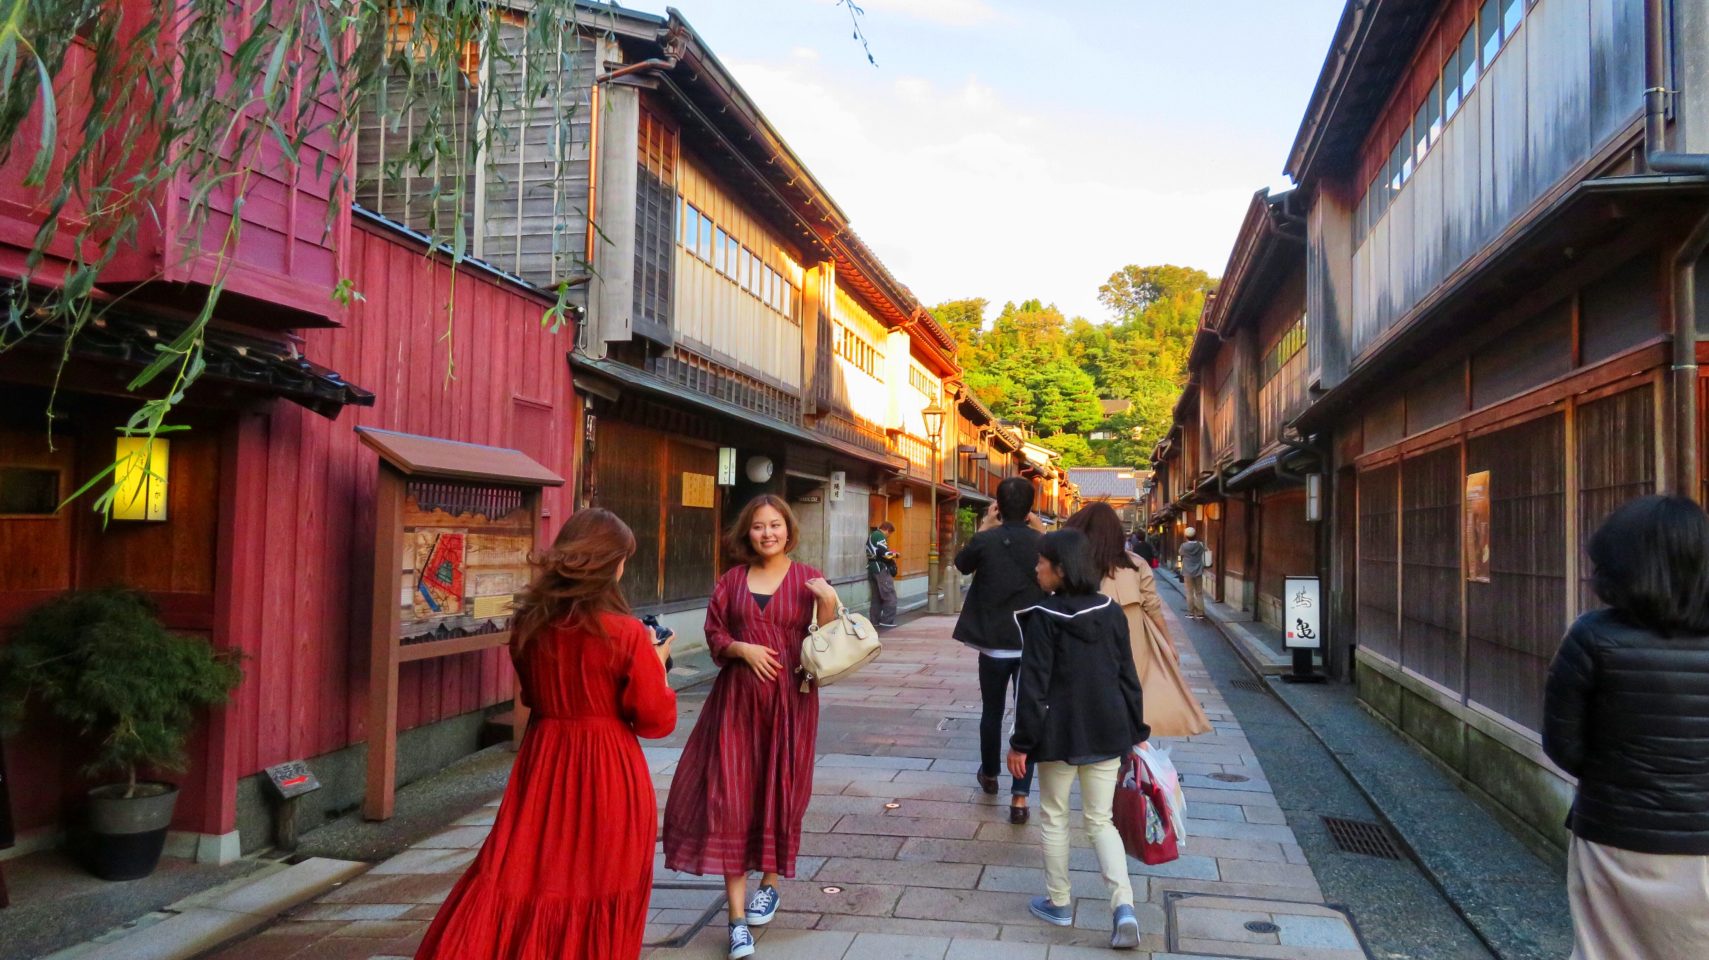 Japan Favorite Experiences ~ Strolling the well preserved Samurai and Geisha districts in Kanazawa